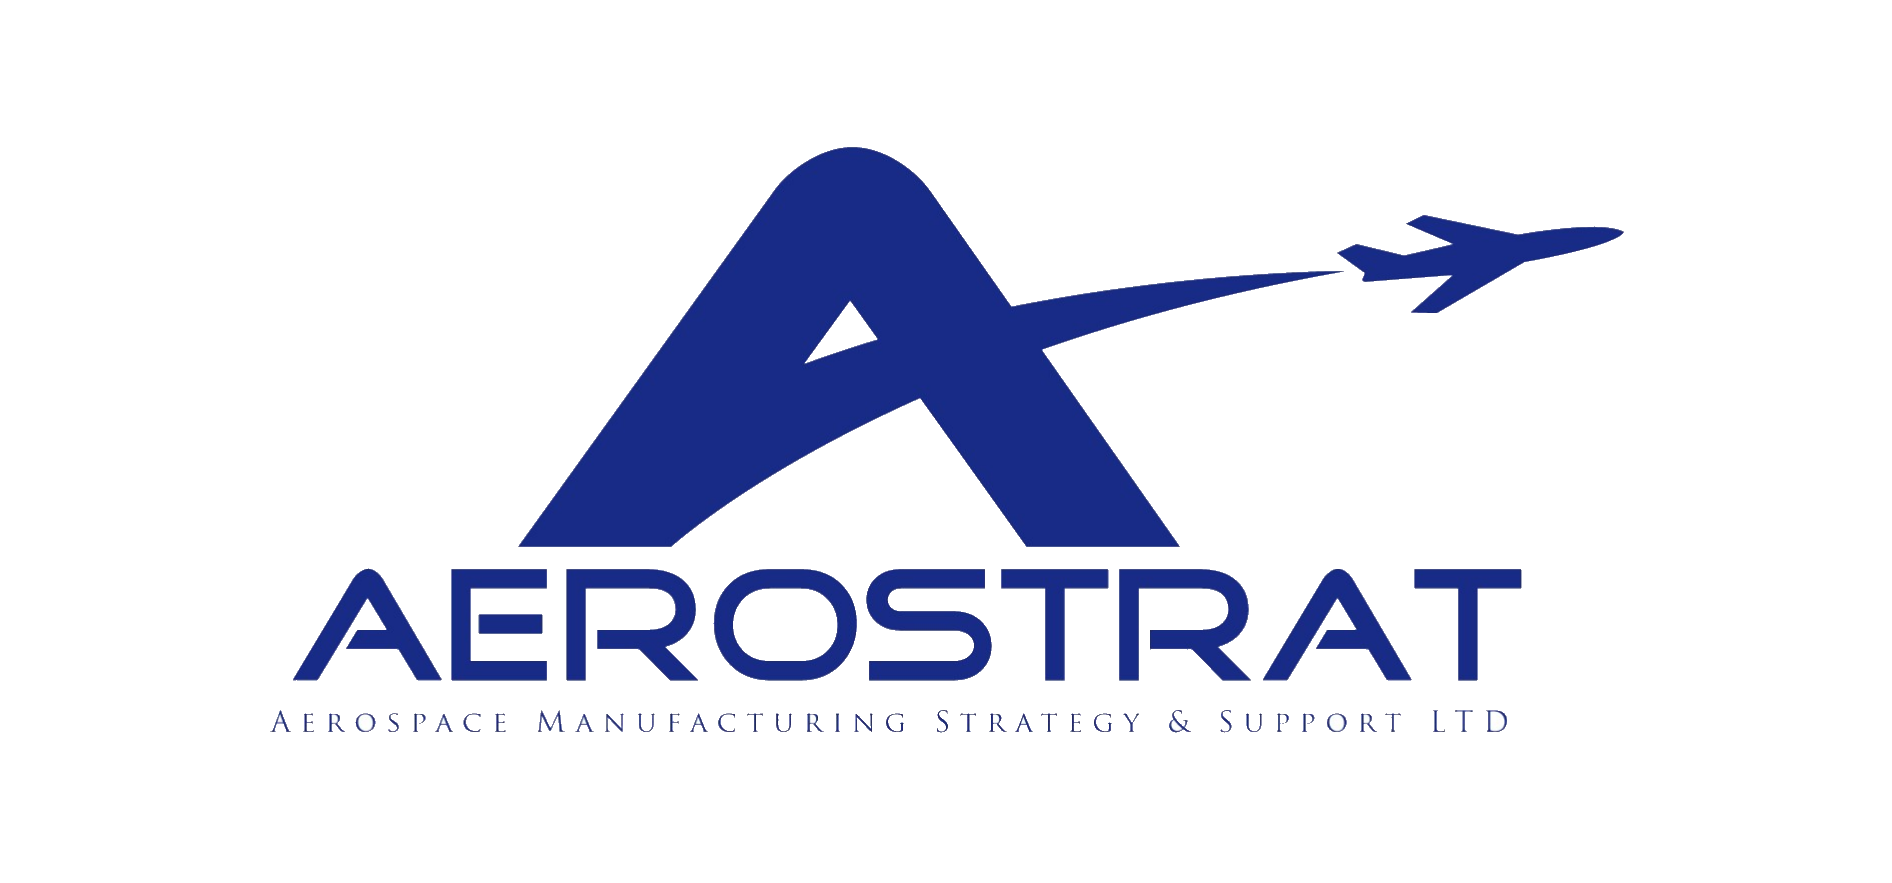 Aerospace Manufacturing Strategy & Support Ltd